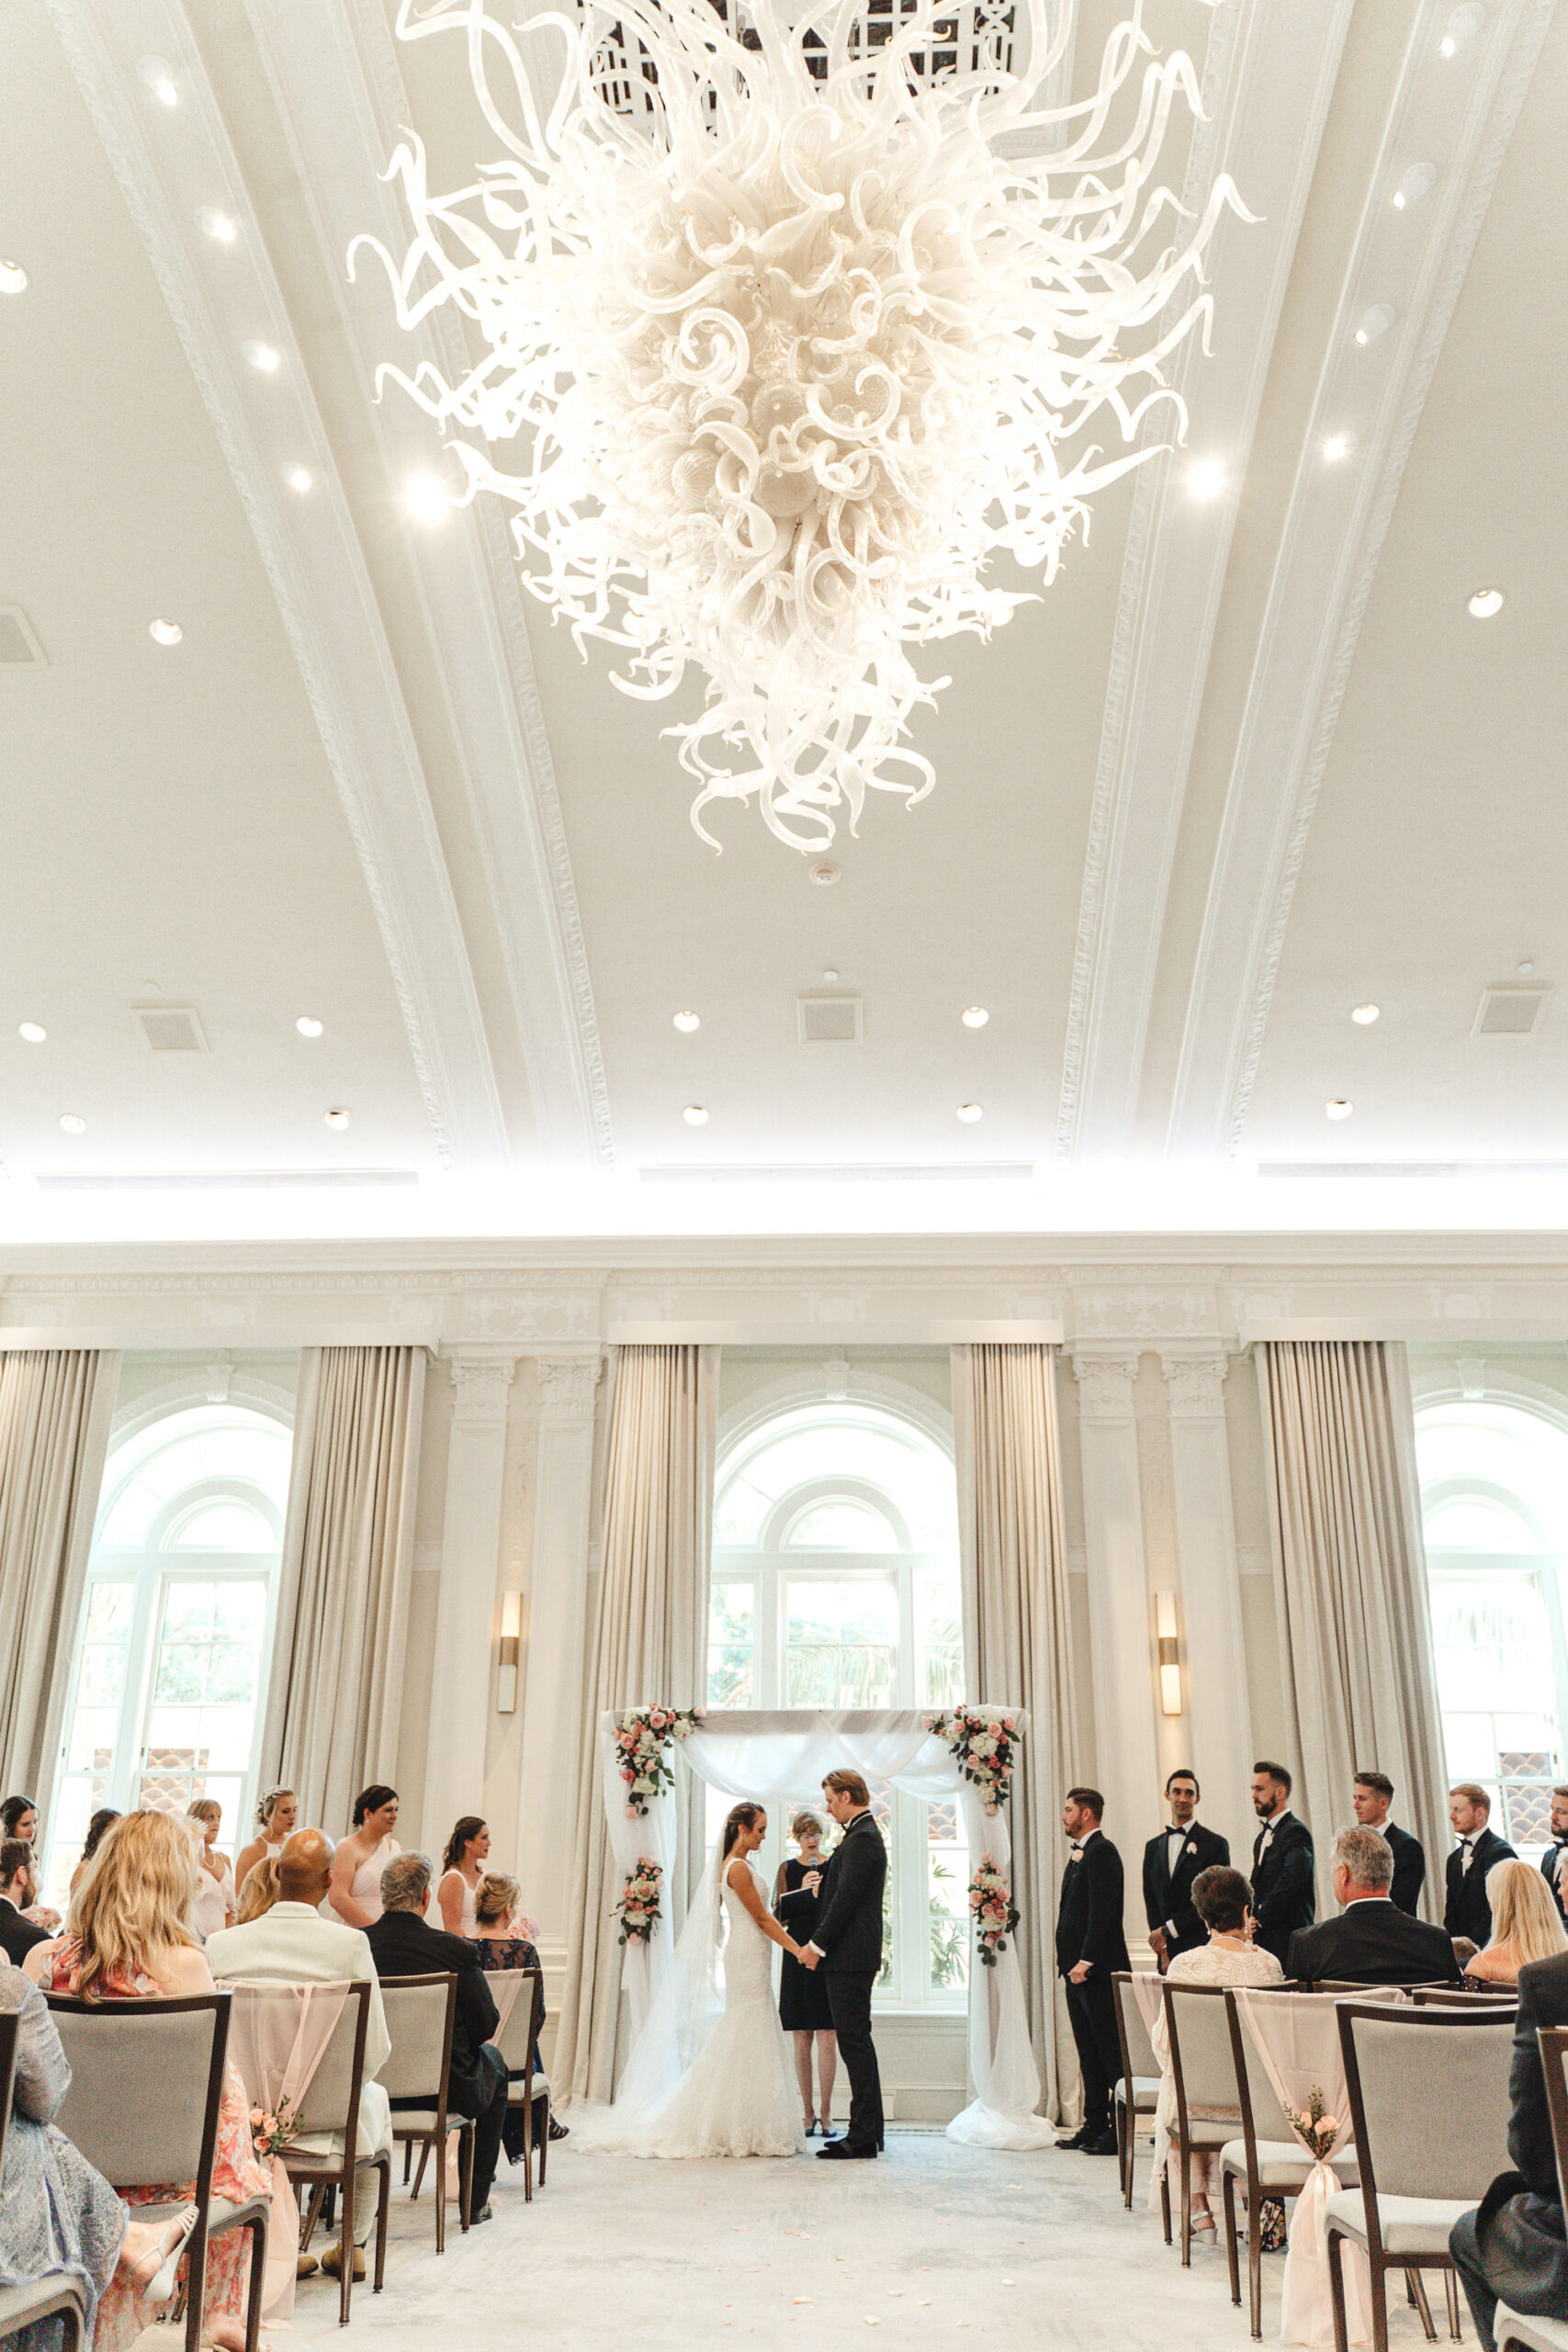 Elegant Ballroom Indoor Wedding Ceremony | The Vinoy Renaissance |Tampa Bay Officiant A Wedding with Grace